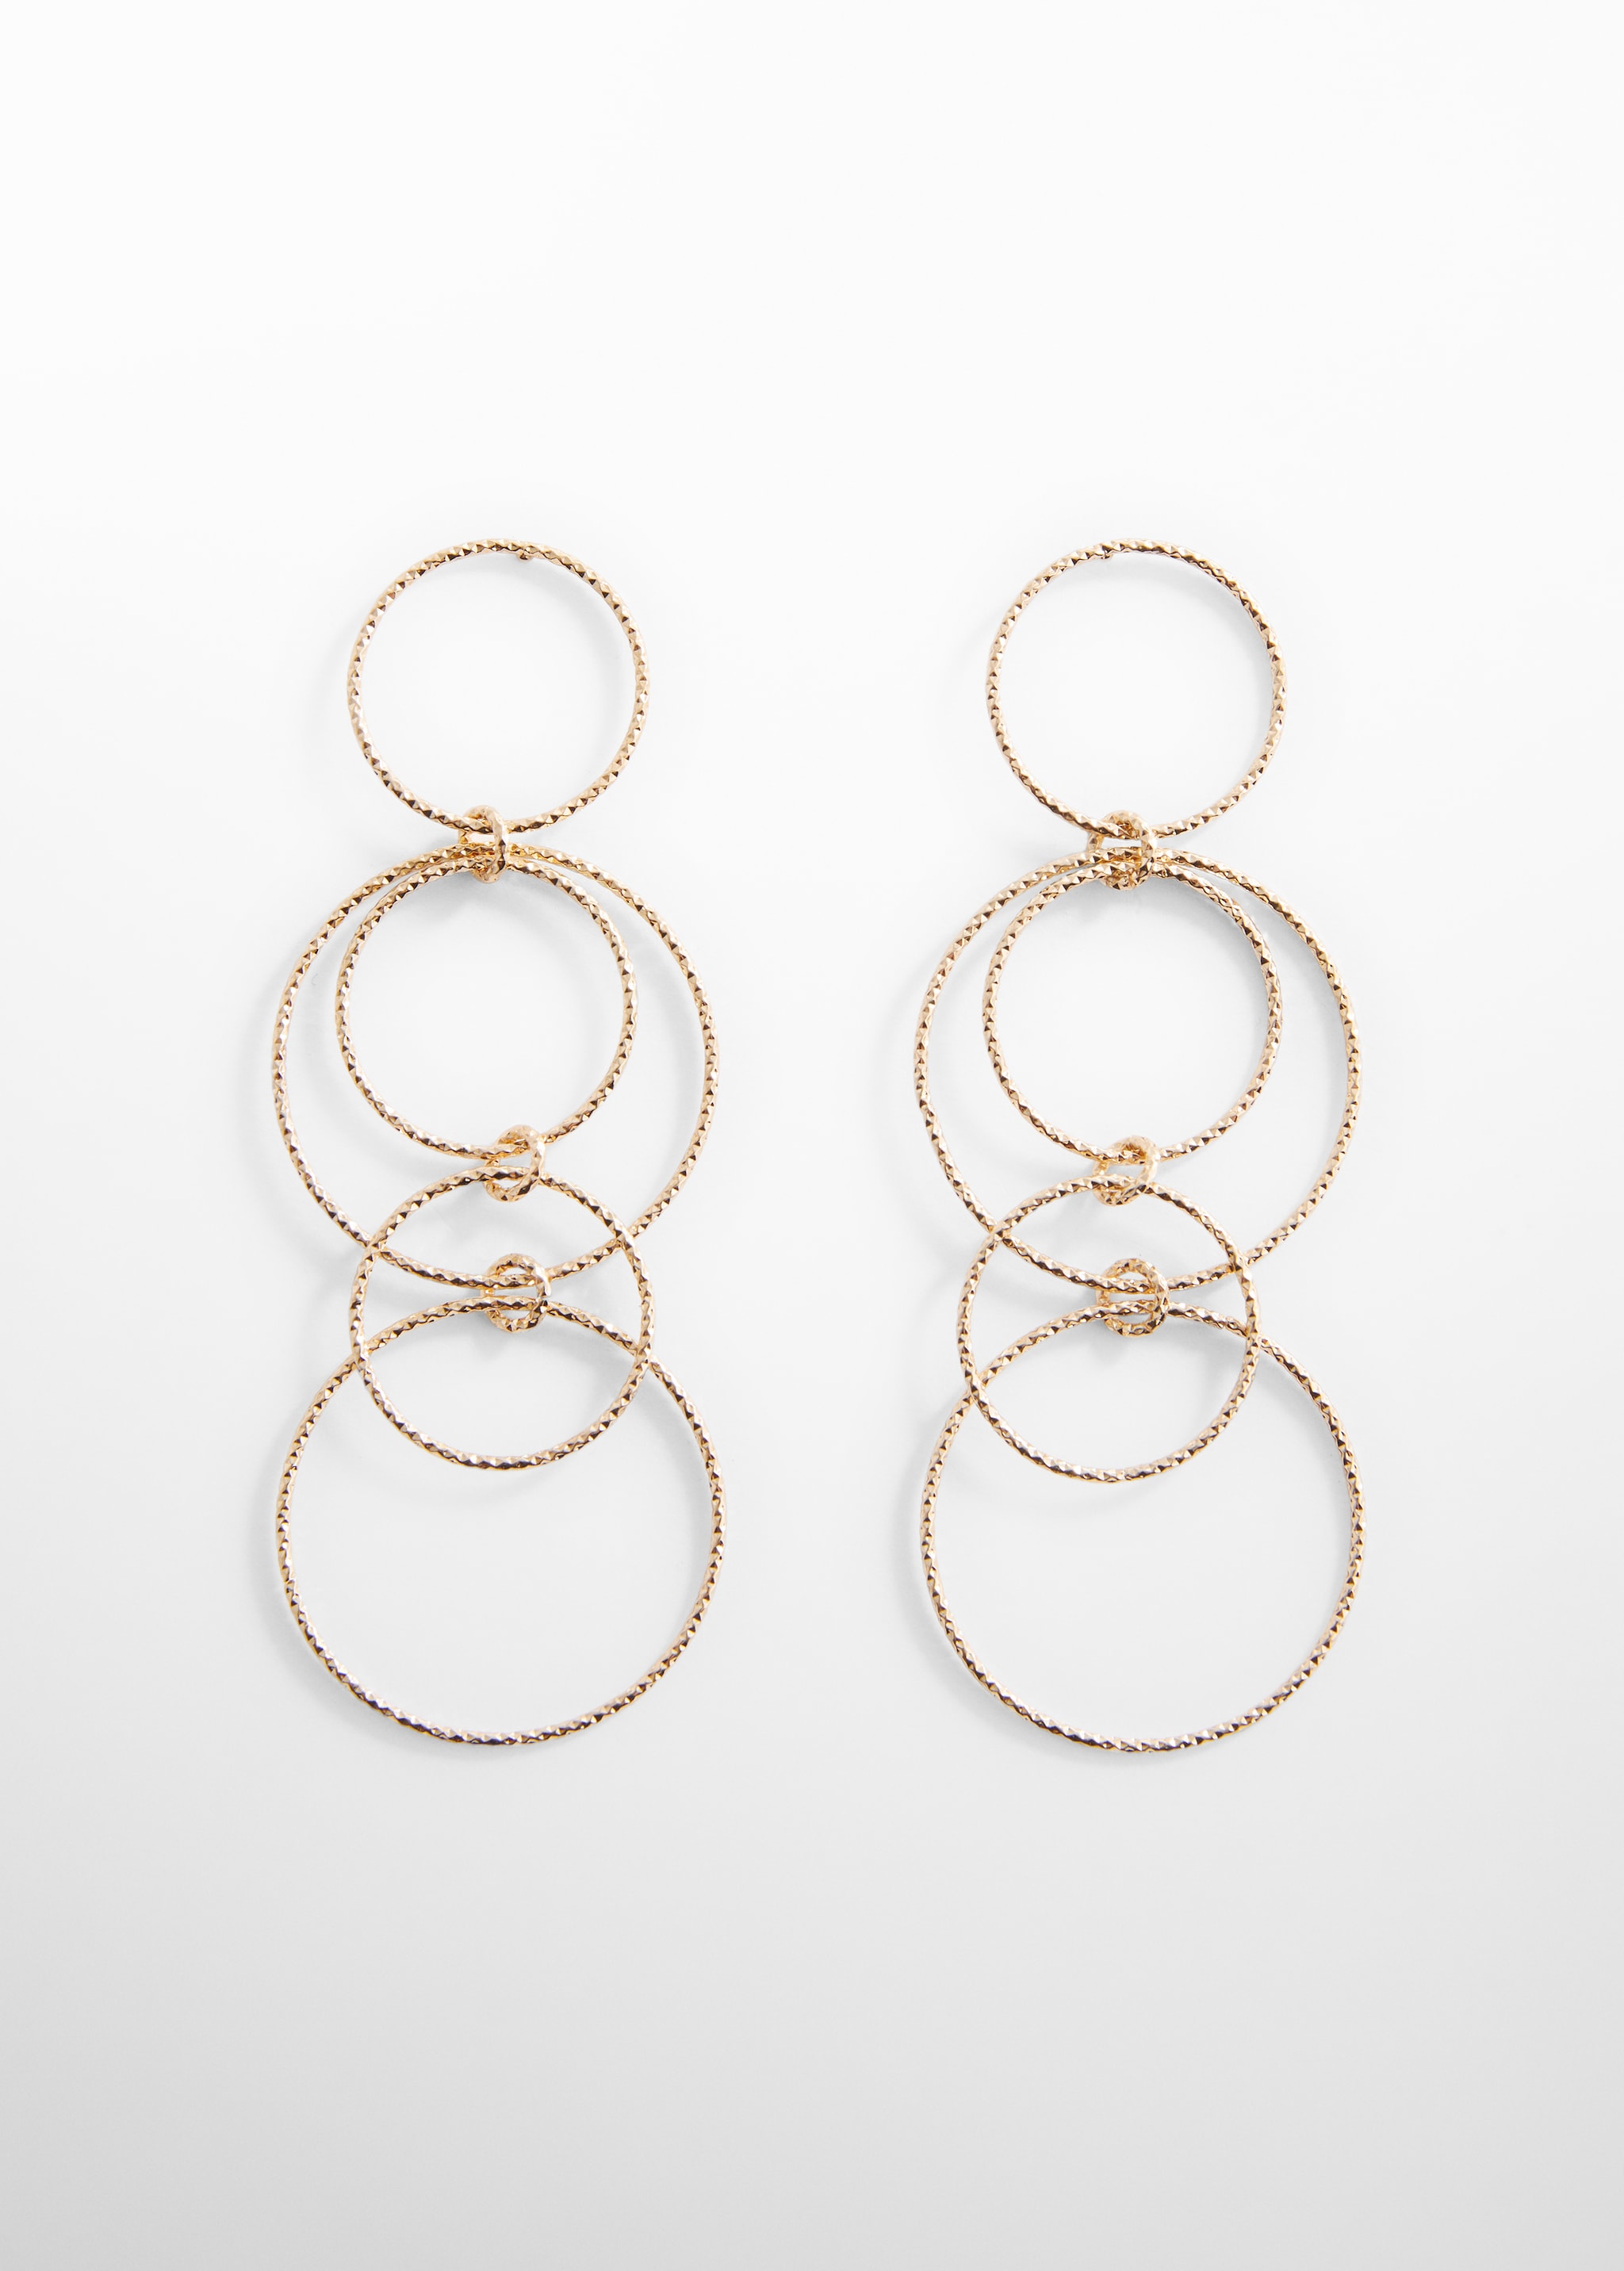 Long earrings with intertwined hoops - Article without model